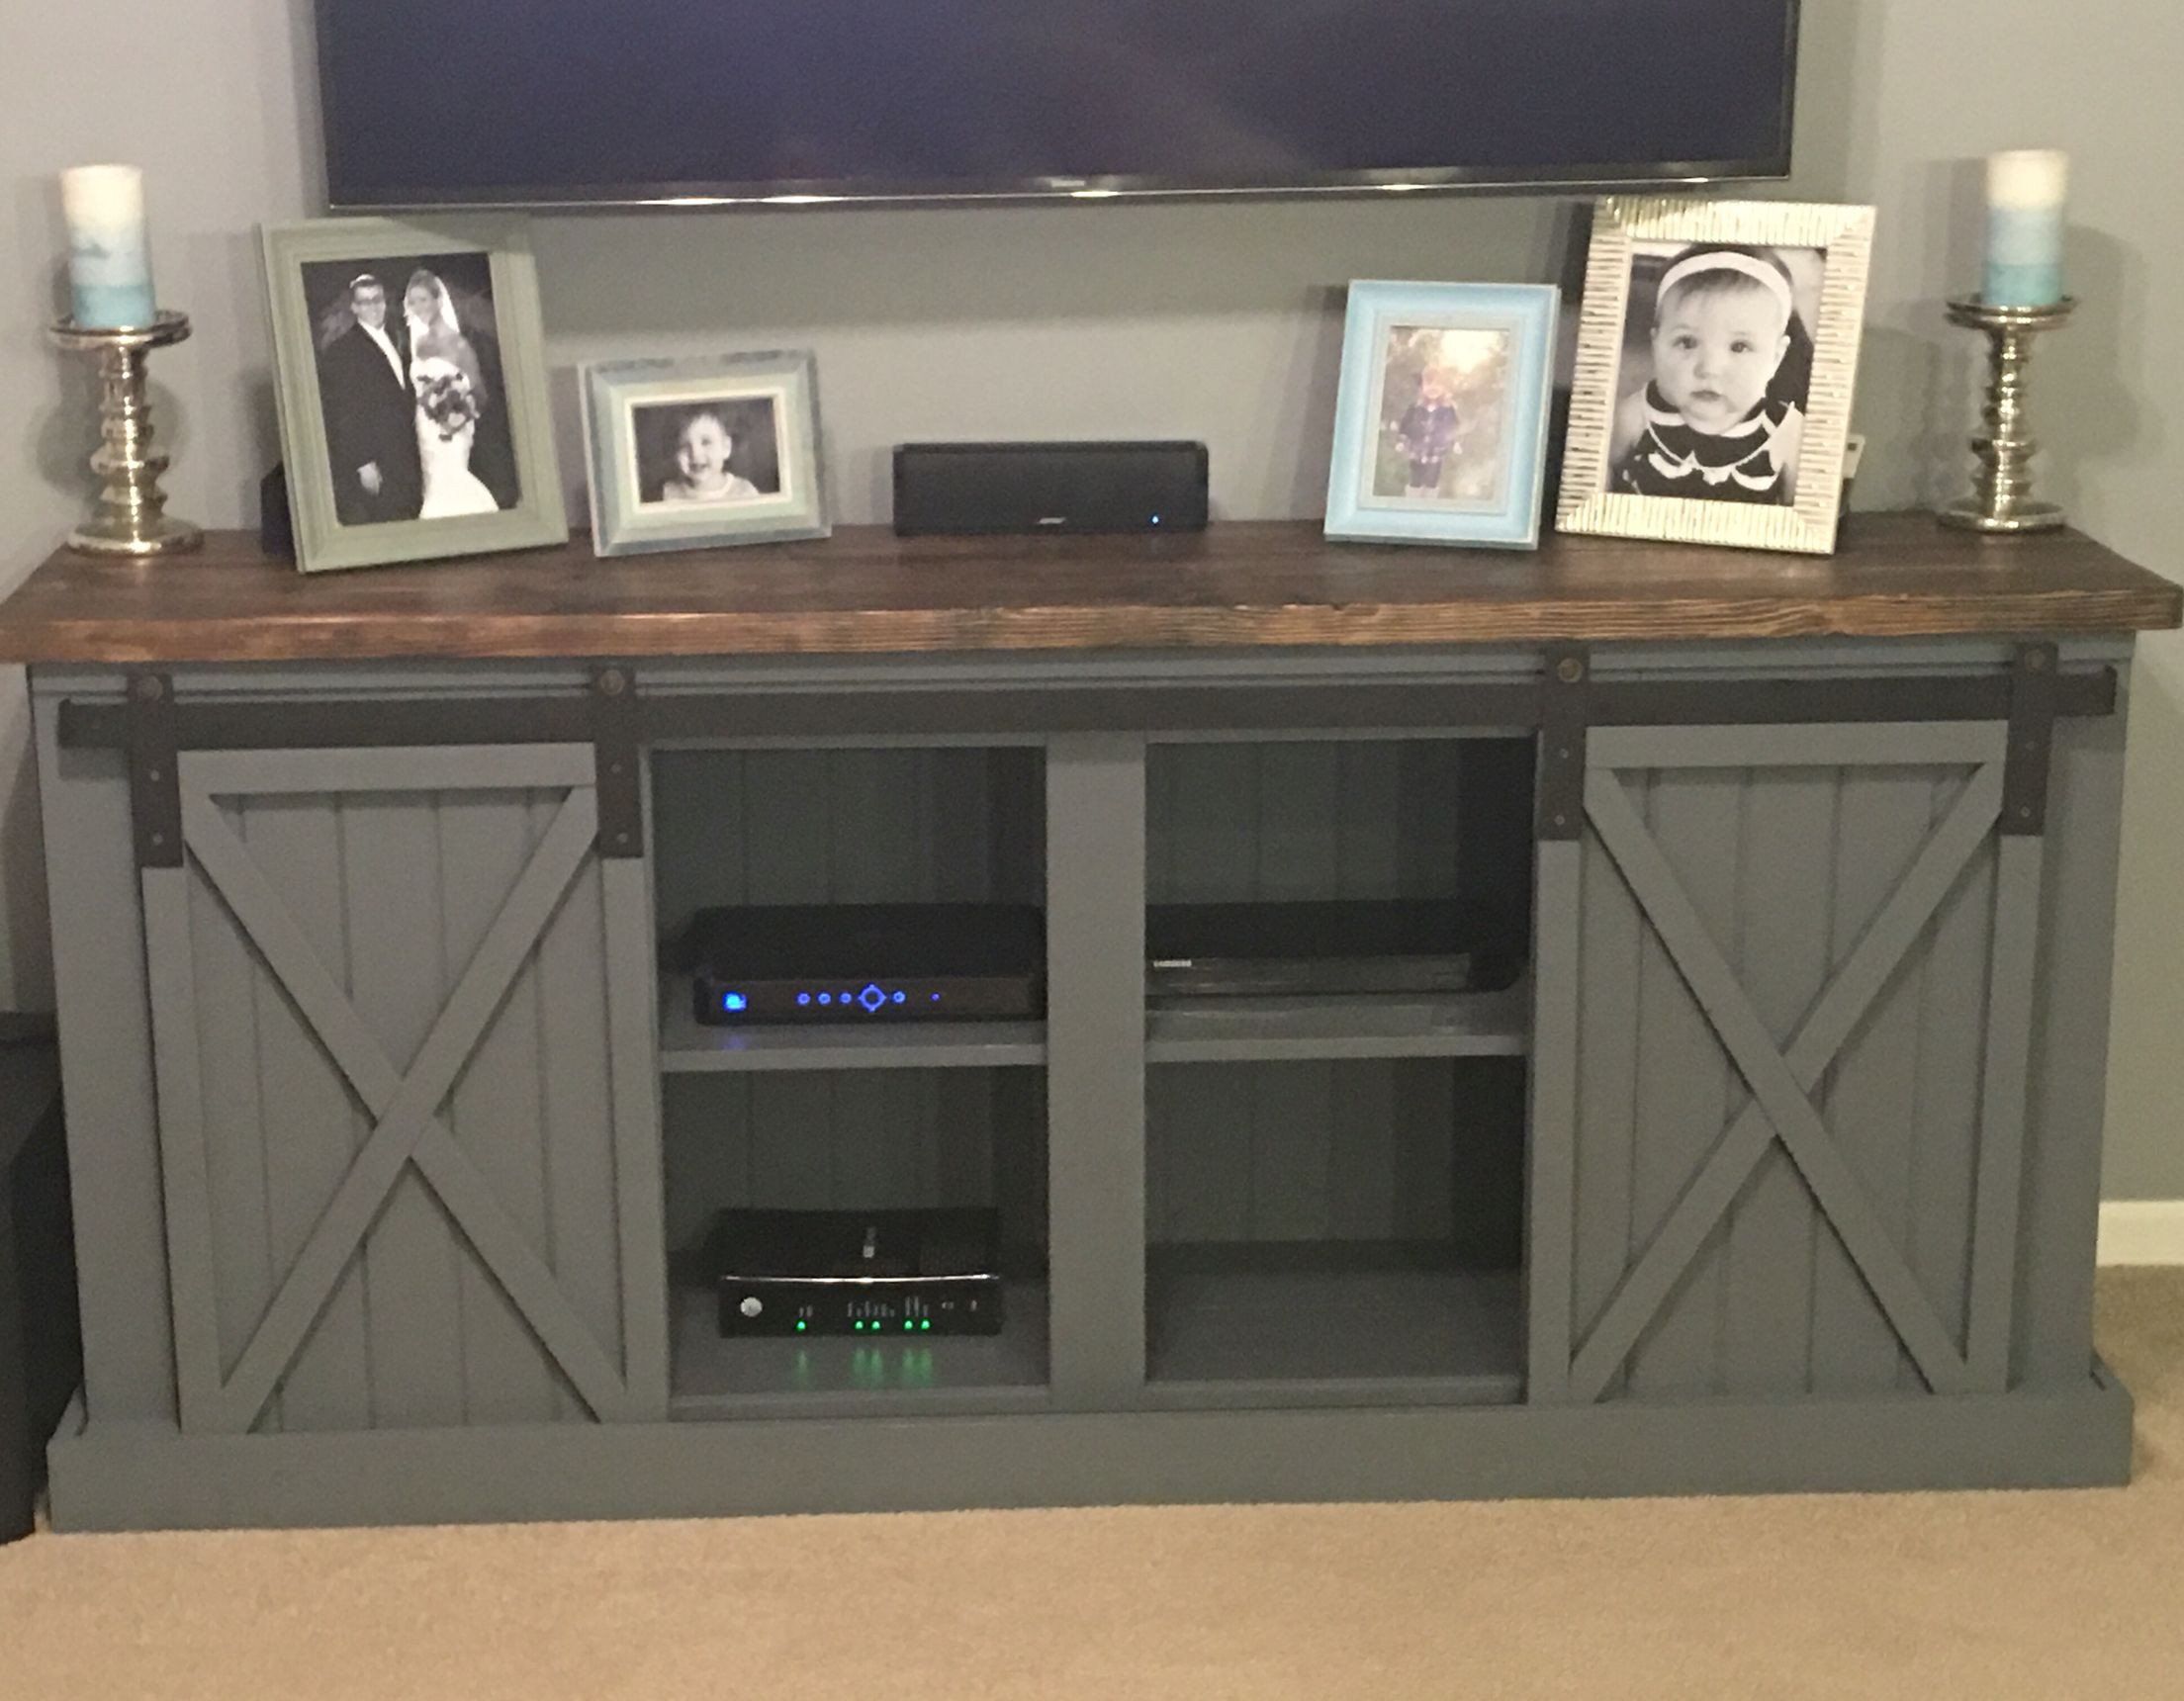 Farmhouse Tv Stand Design Ideas and Decor 17 Diy Entertainment Center Ideas and Designs for Your New